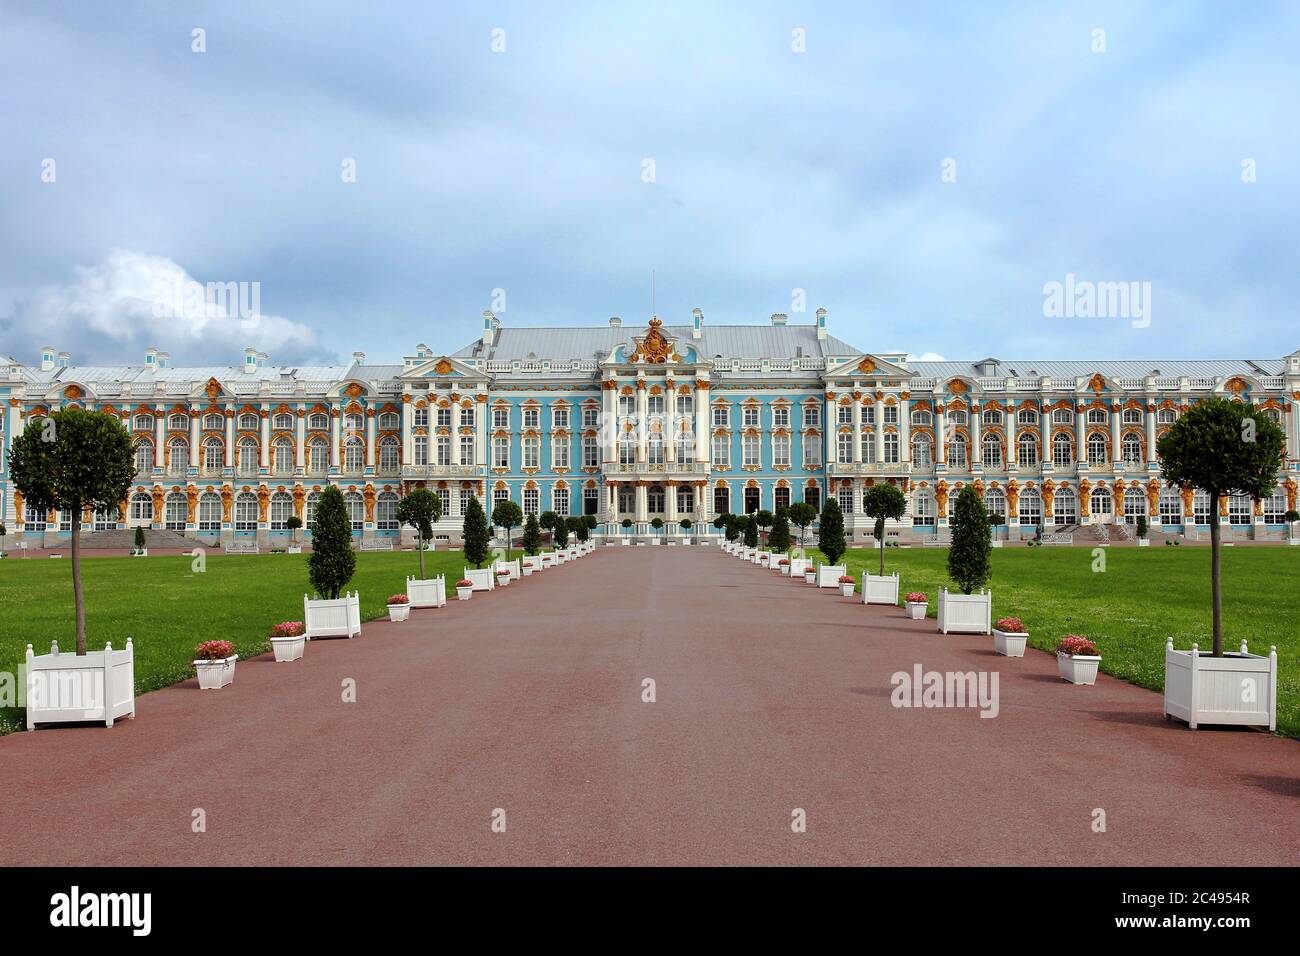 Pushkin Palace (officially reffered to as Tsarskoe Selo = Tsar's Village) it's a lavish imperial palace build in 1752 for Tsarina Elizabeth which name Stock Photo